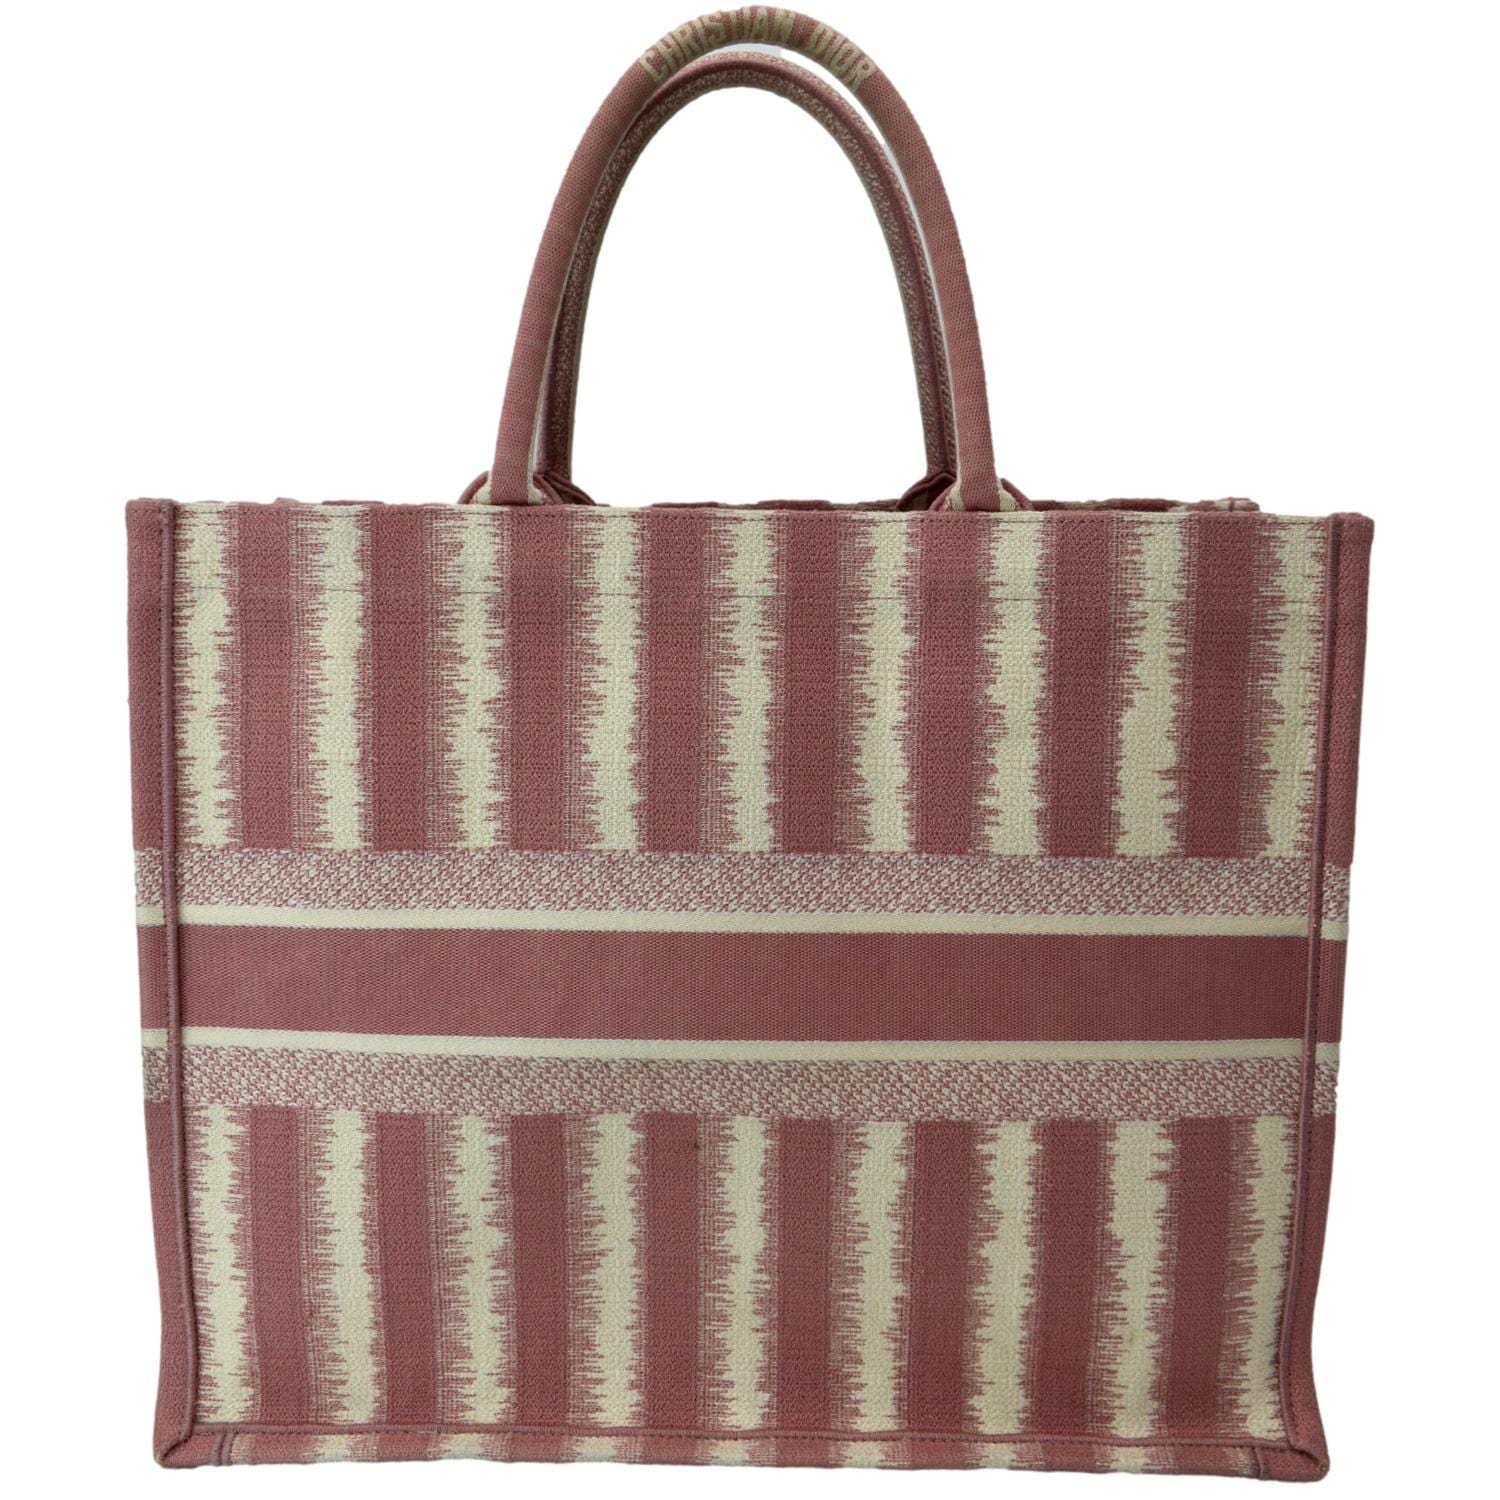 CHRISTIAN DIOR Book Stripe Embroidered Canvas Tote Bag Pink